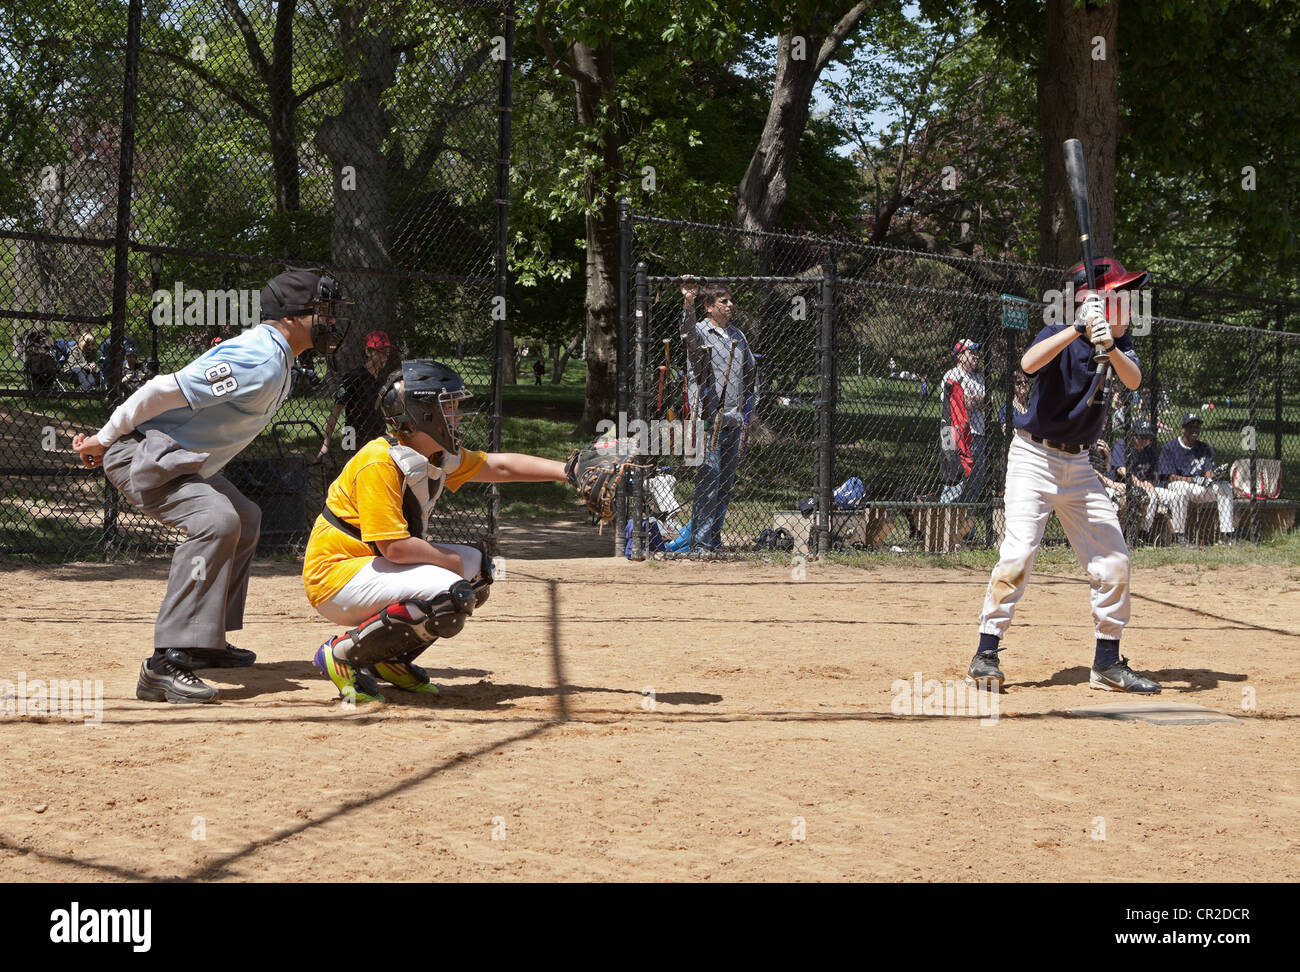 A batter waits for a pitch in a baseball game in Prospect Park in Brooklyn, New York. Stock Photo